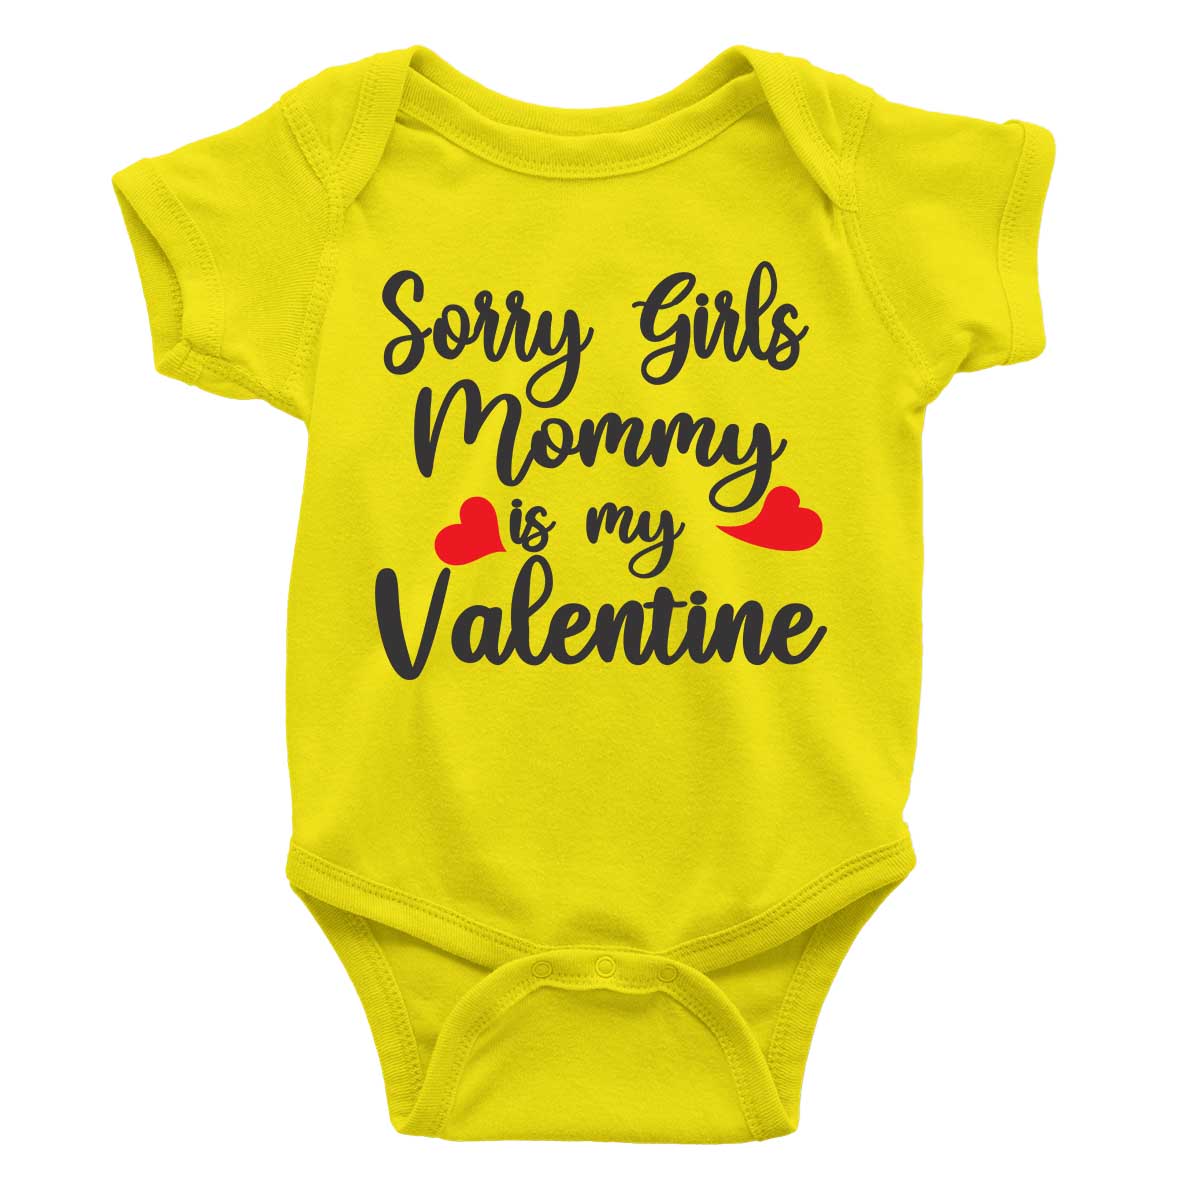 sorry girls mommy is my valentine yellow